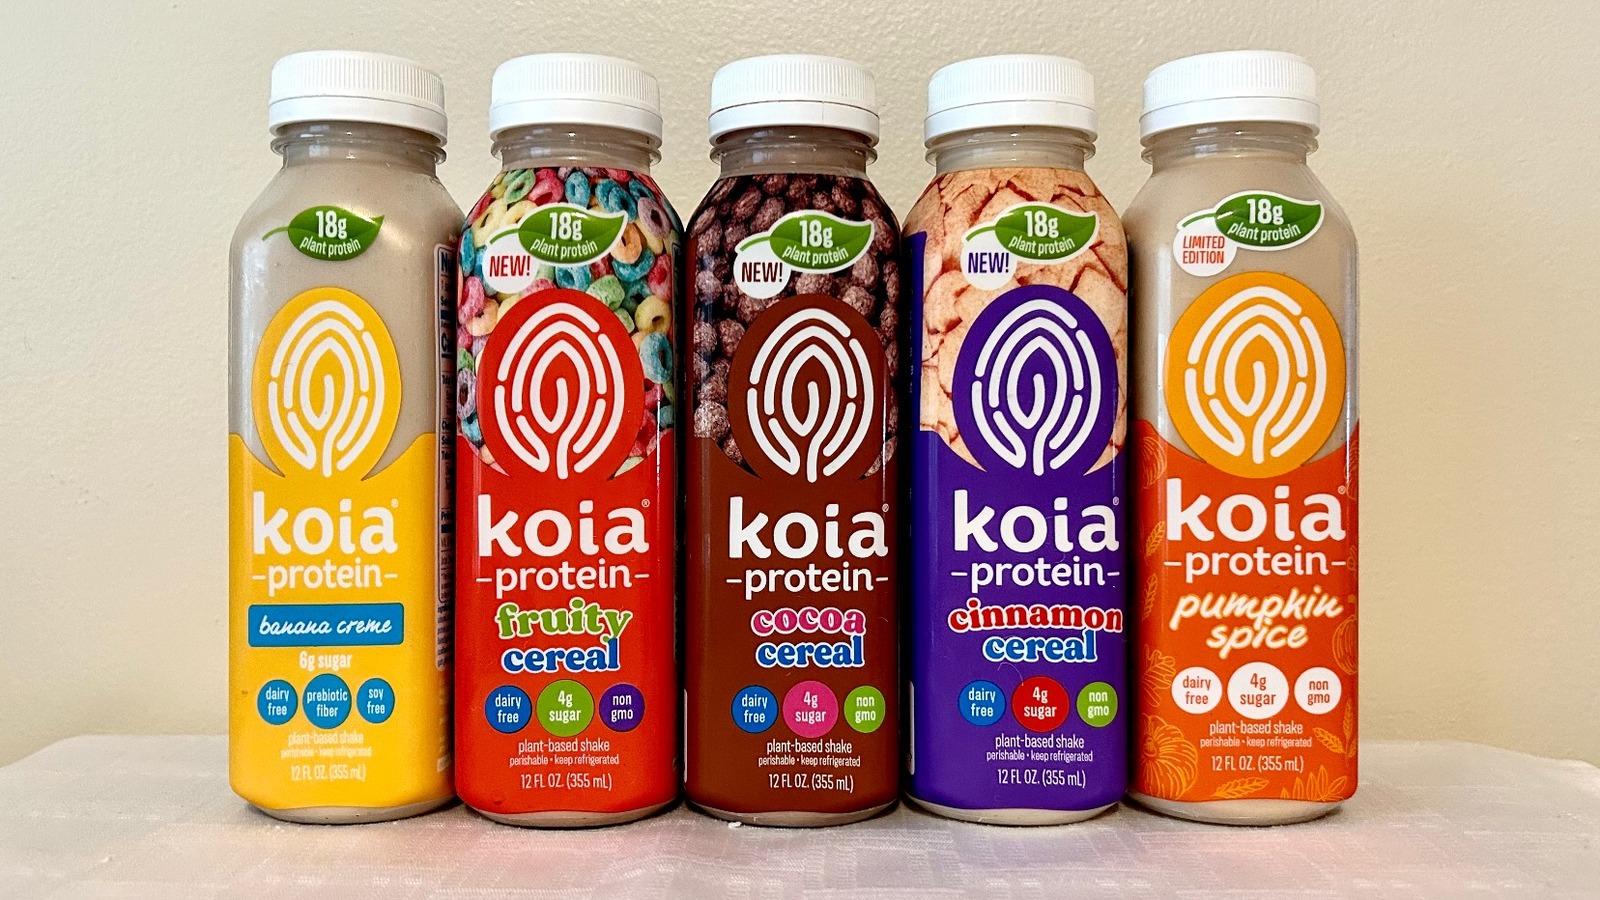 https://www.thedailymeal.com/img/gallery/5-koia-protein-shake-flavors-ranked/l-intro-1695239772.jpg